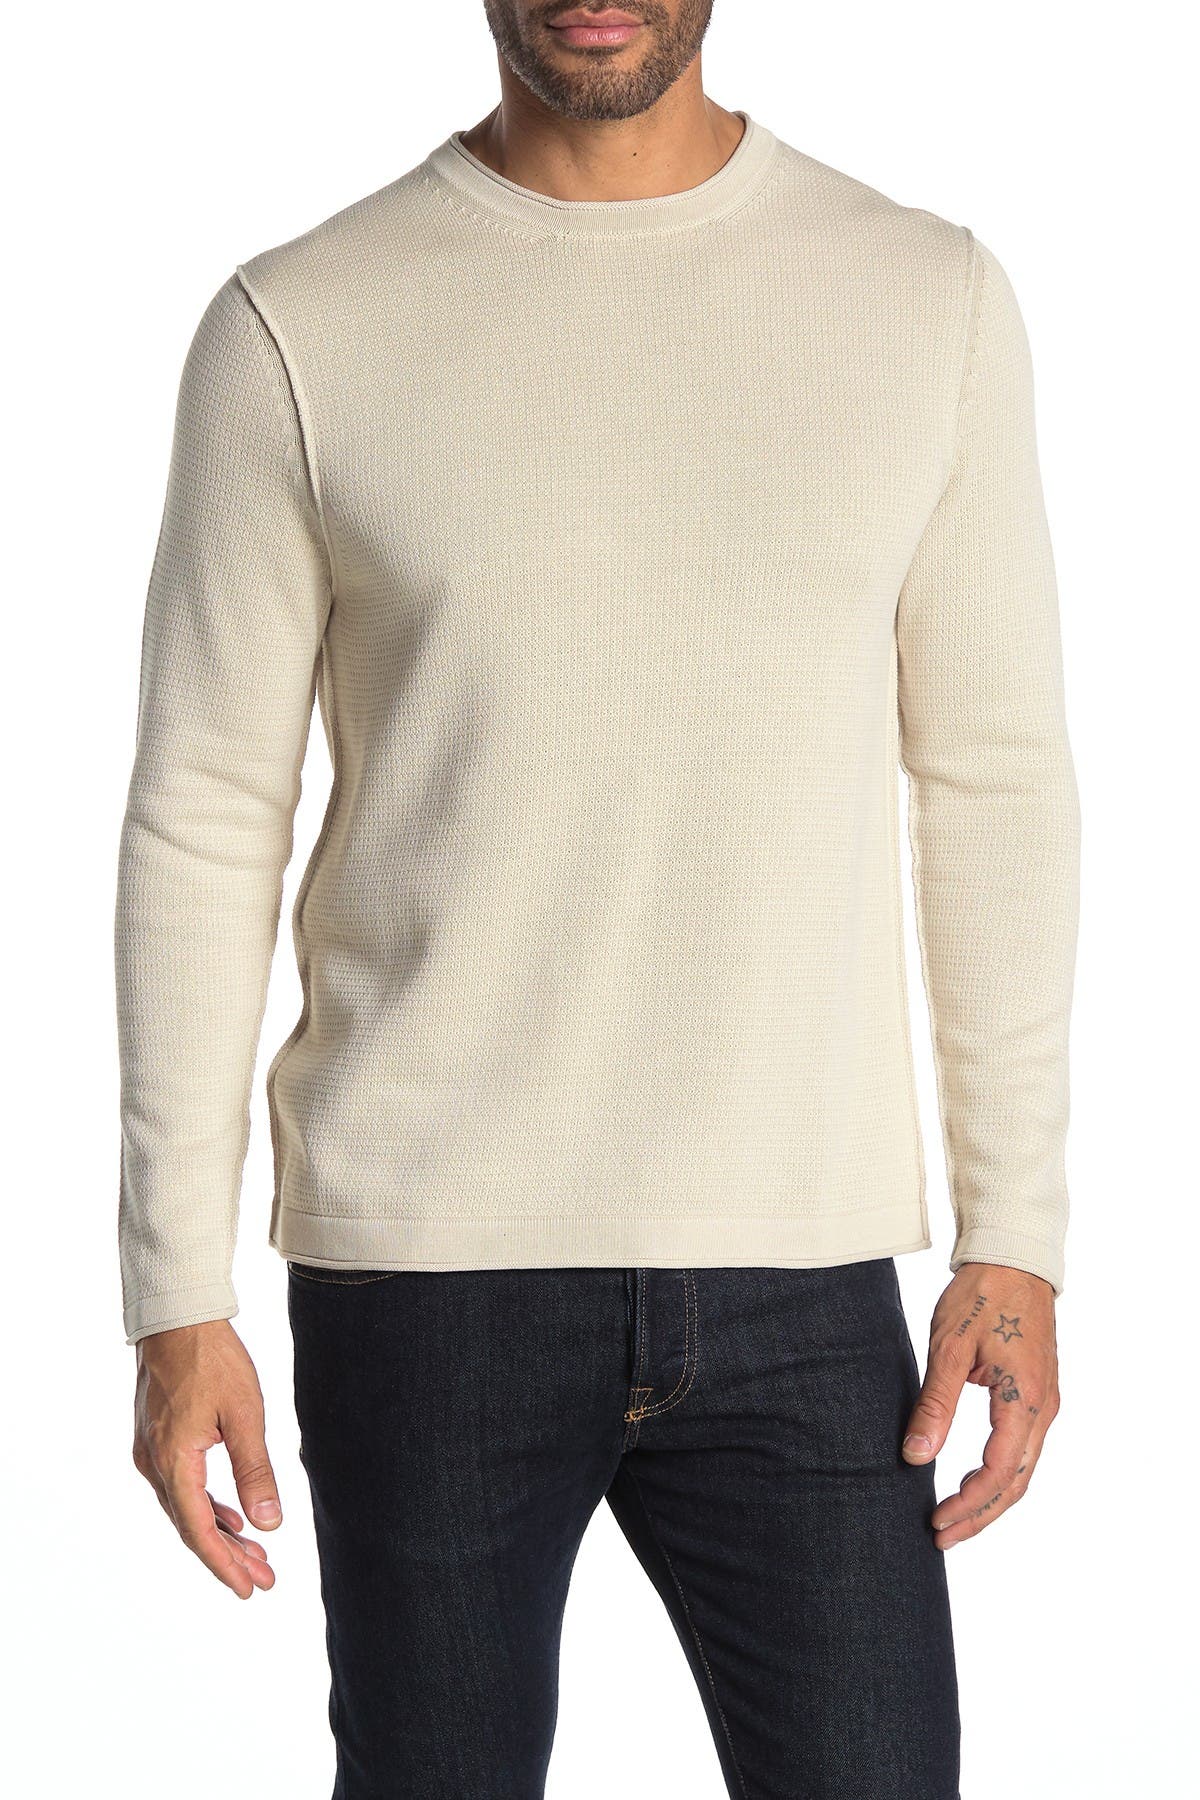 Tommy Bahama | South Shore Flip Sweater | Nordstrom Rack